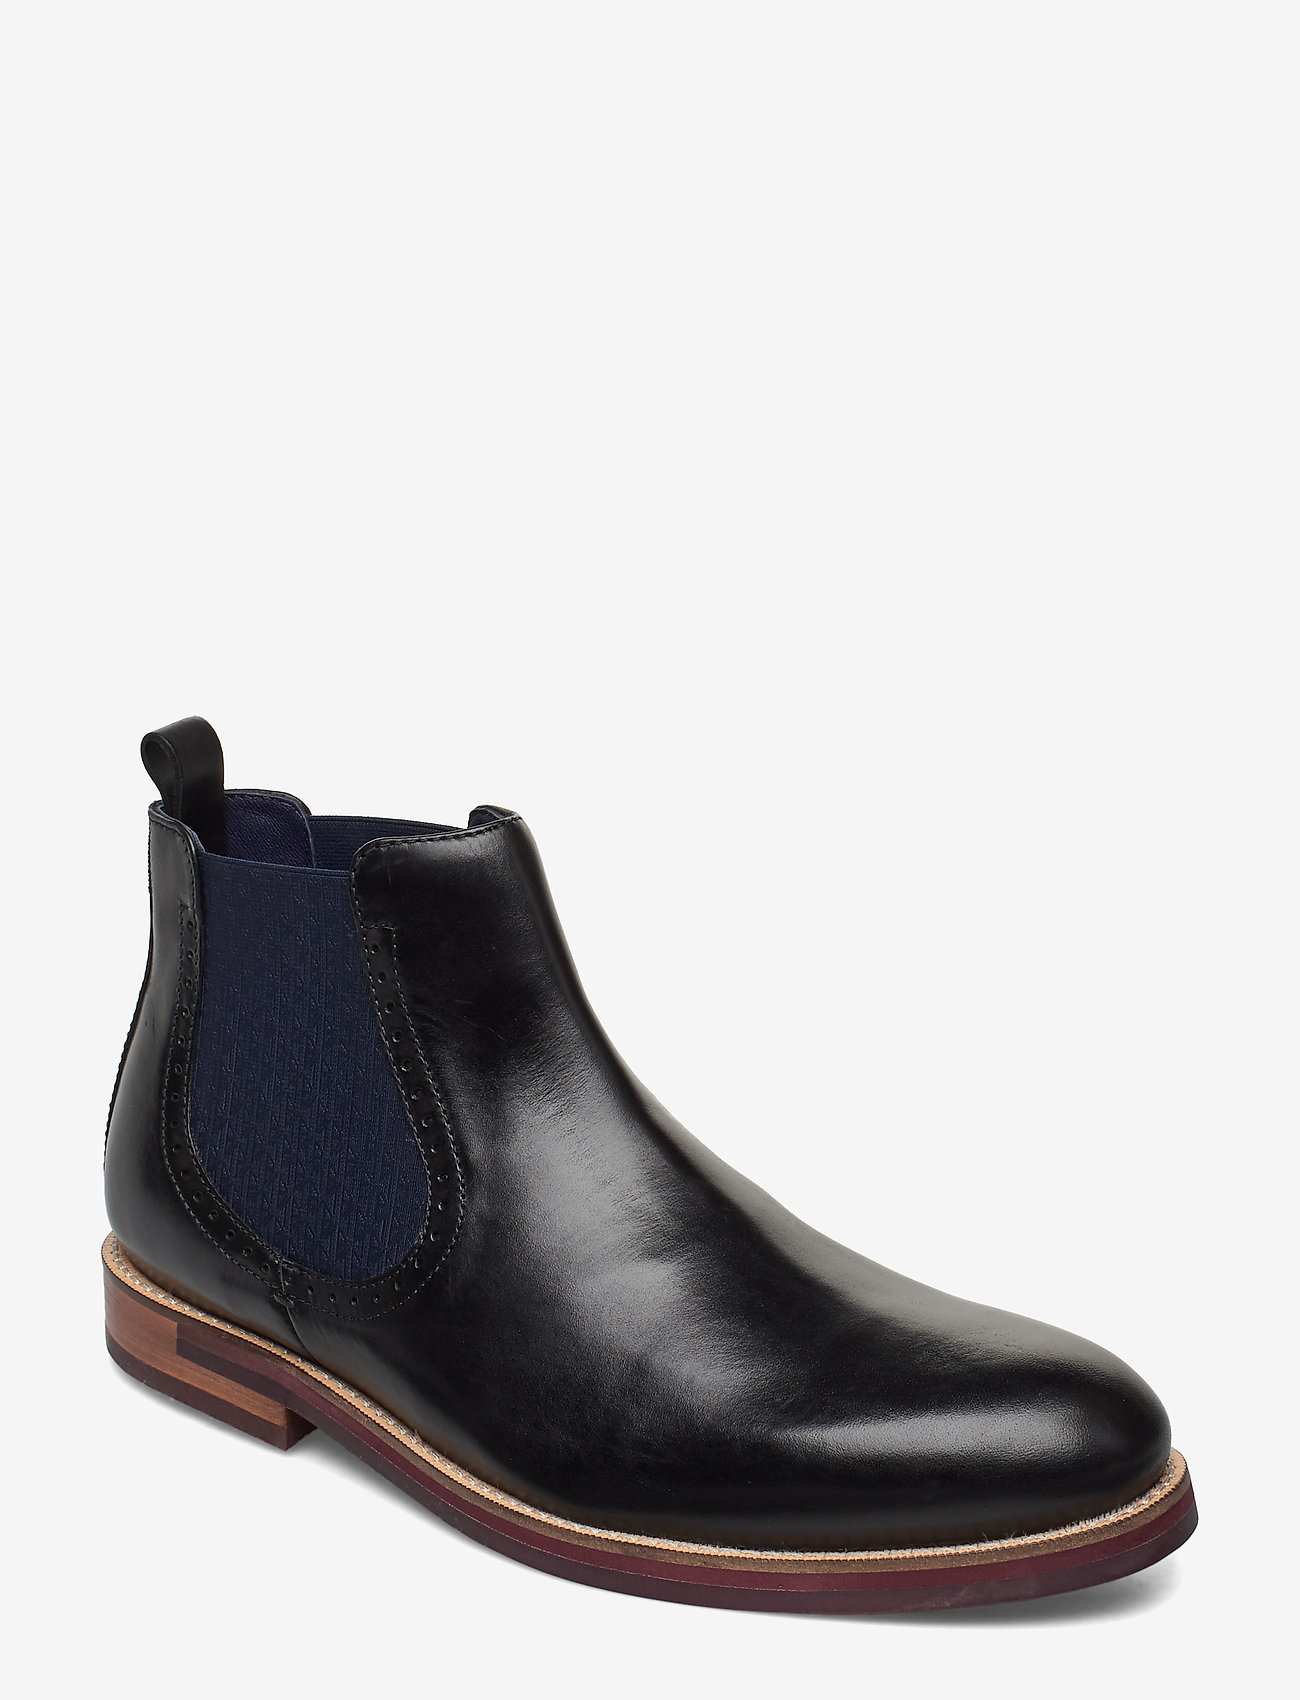 ted baker boots black